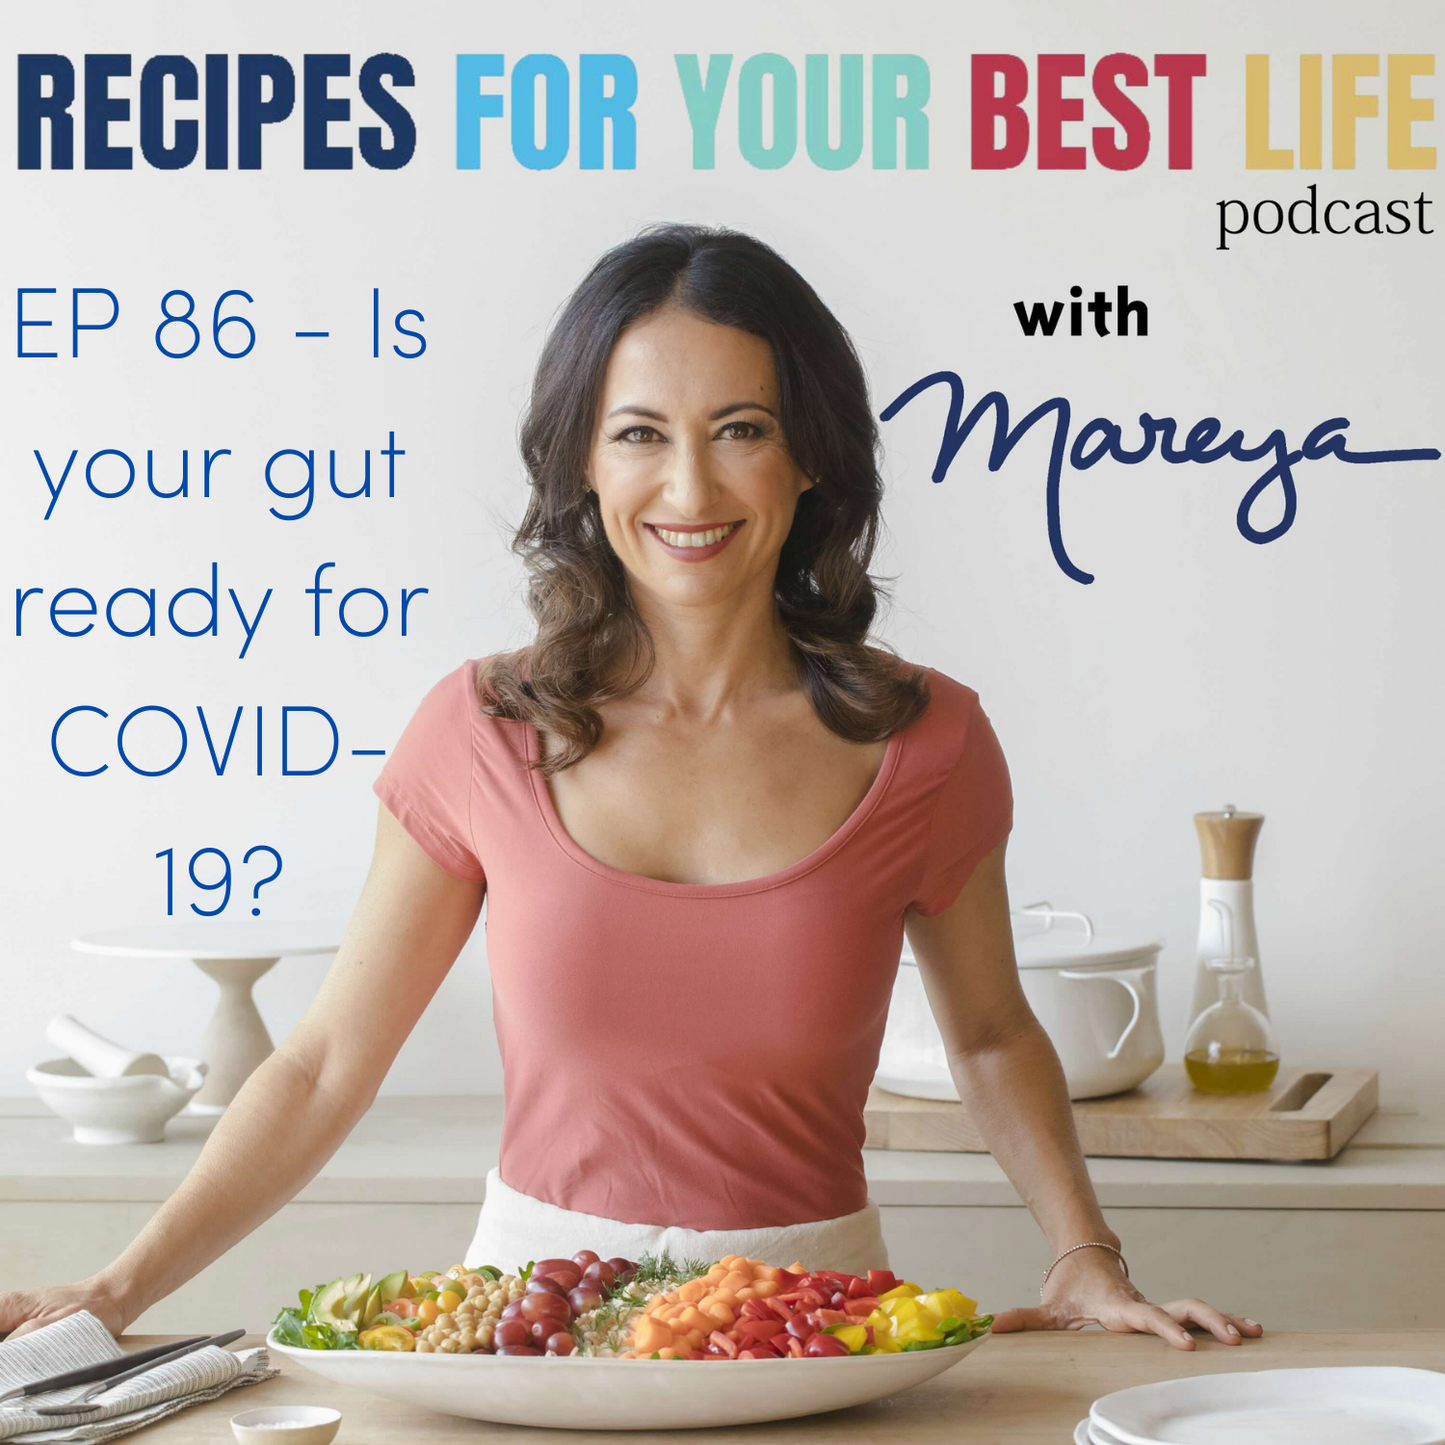 EP 86 – IS YOUR GUT READY FOR COVID-19?